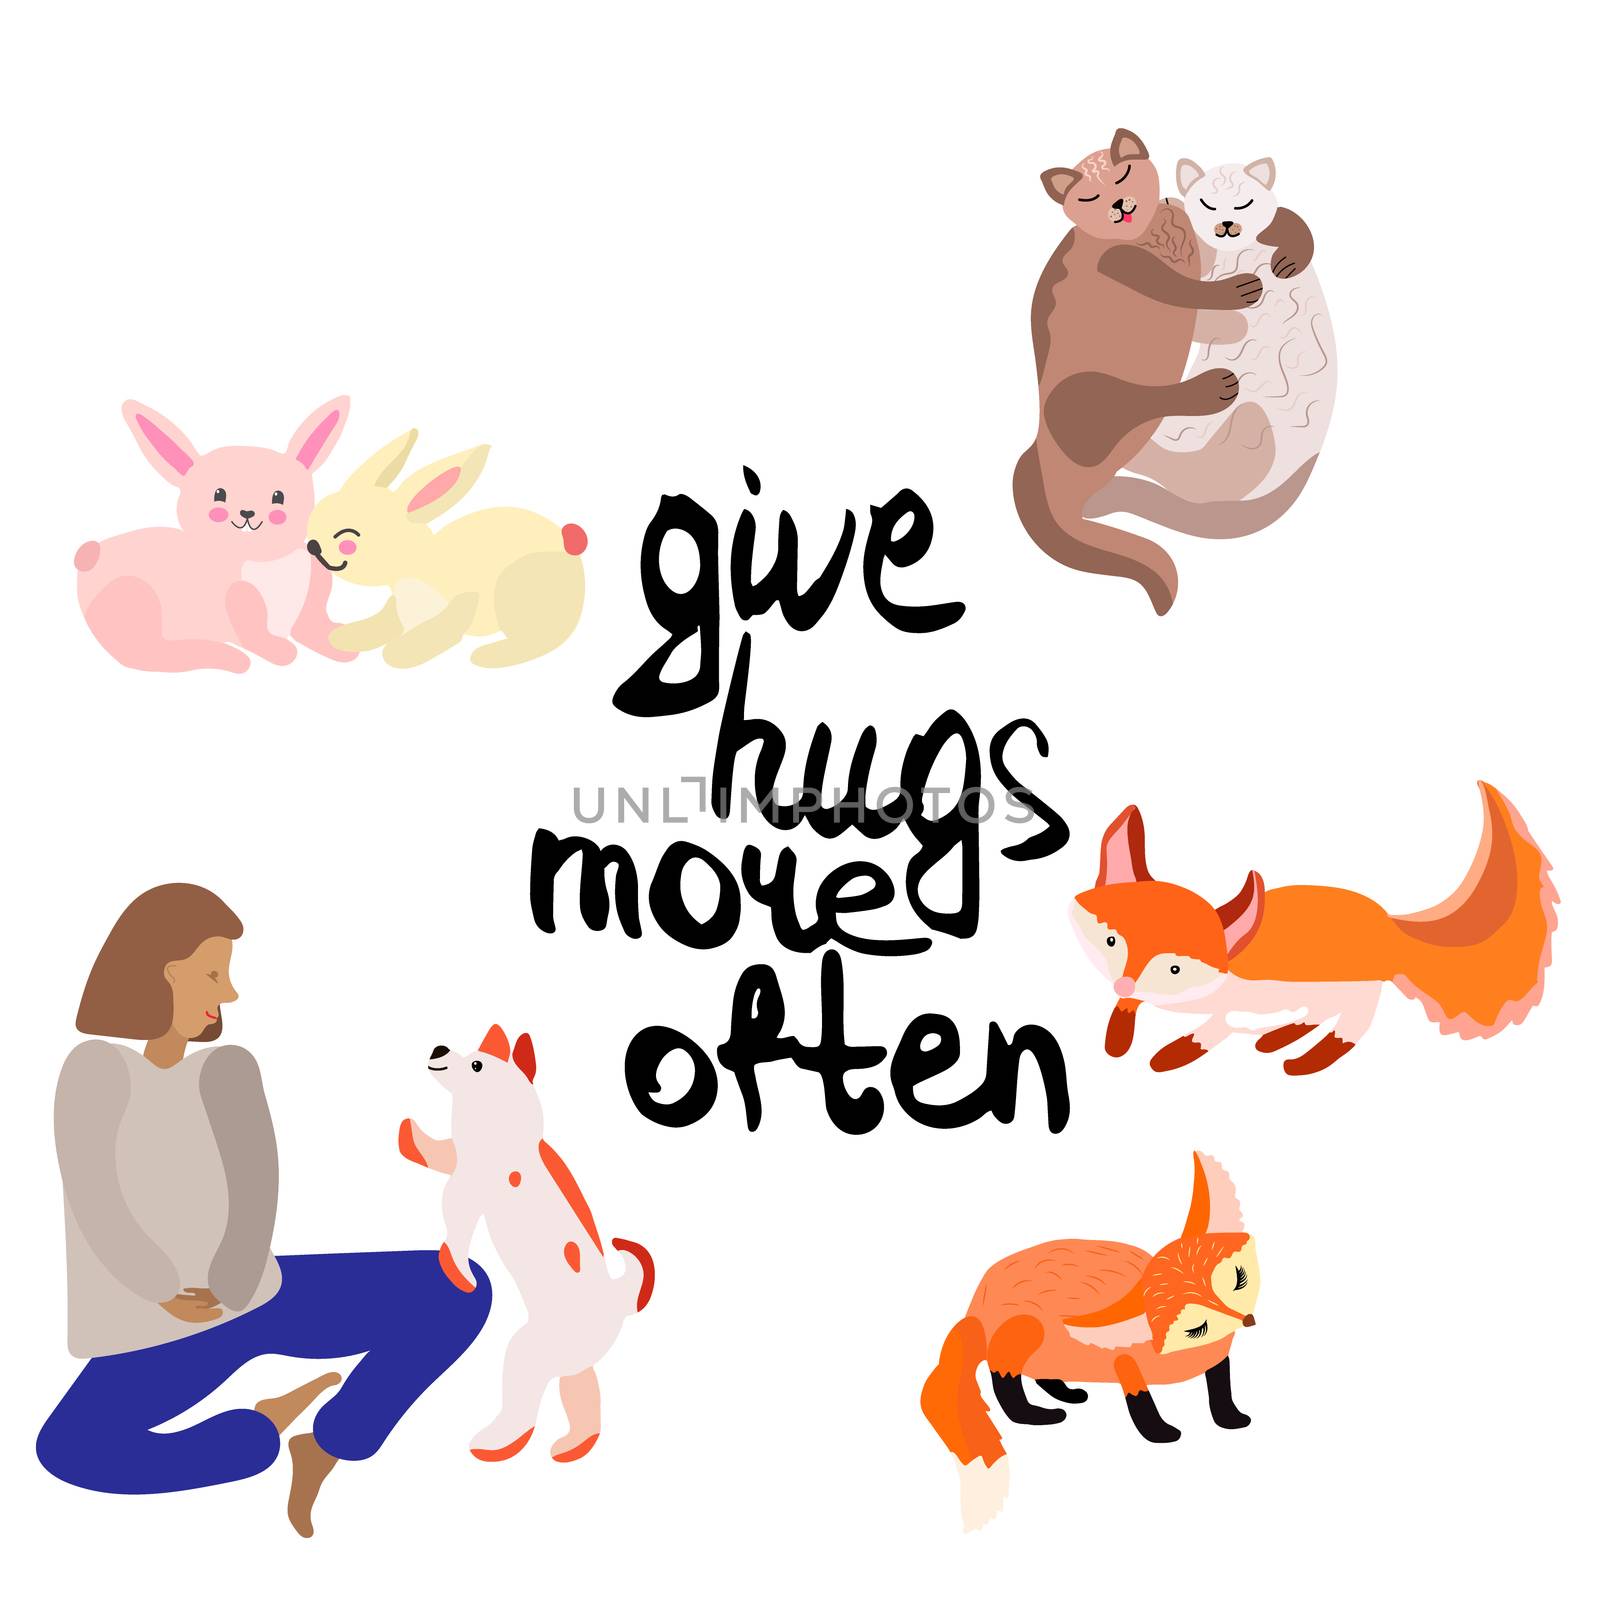 Woman with dog, bunnies, foxes scenes set, humans and their beloved pets at home, hugging cats. Best friends love cute cartoon graphics. Vector illustration on white background.